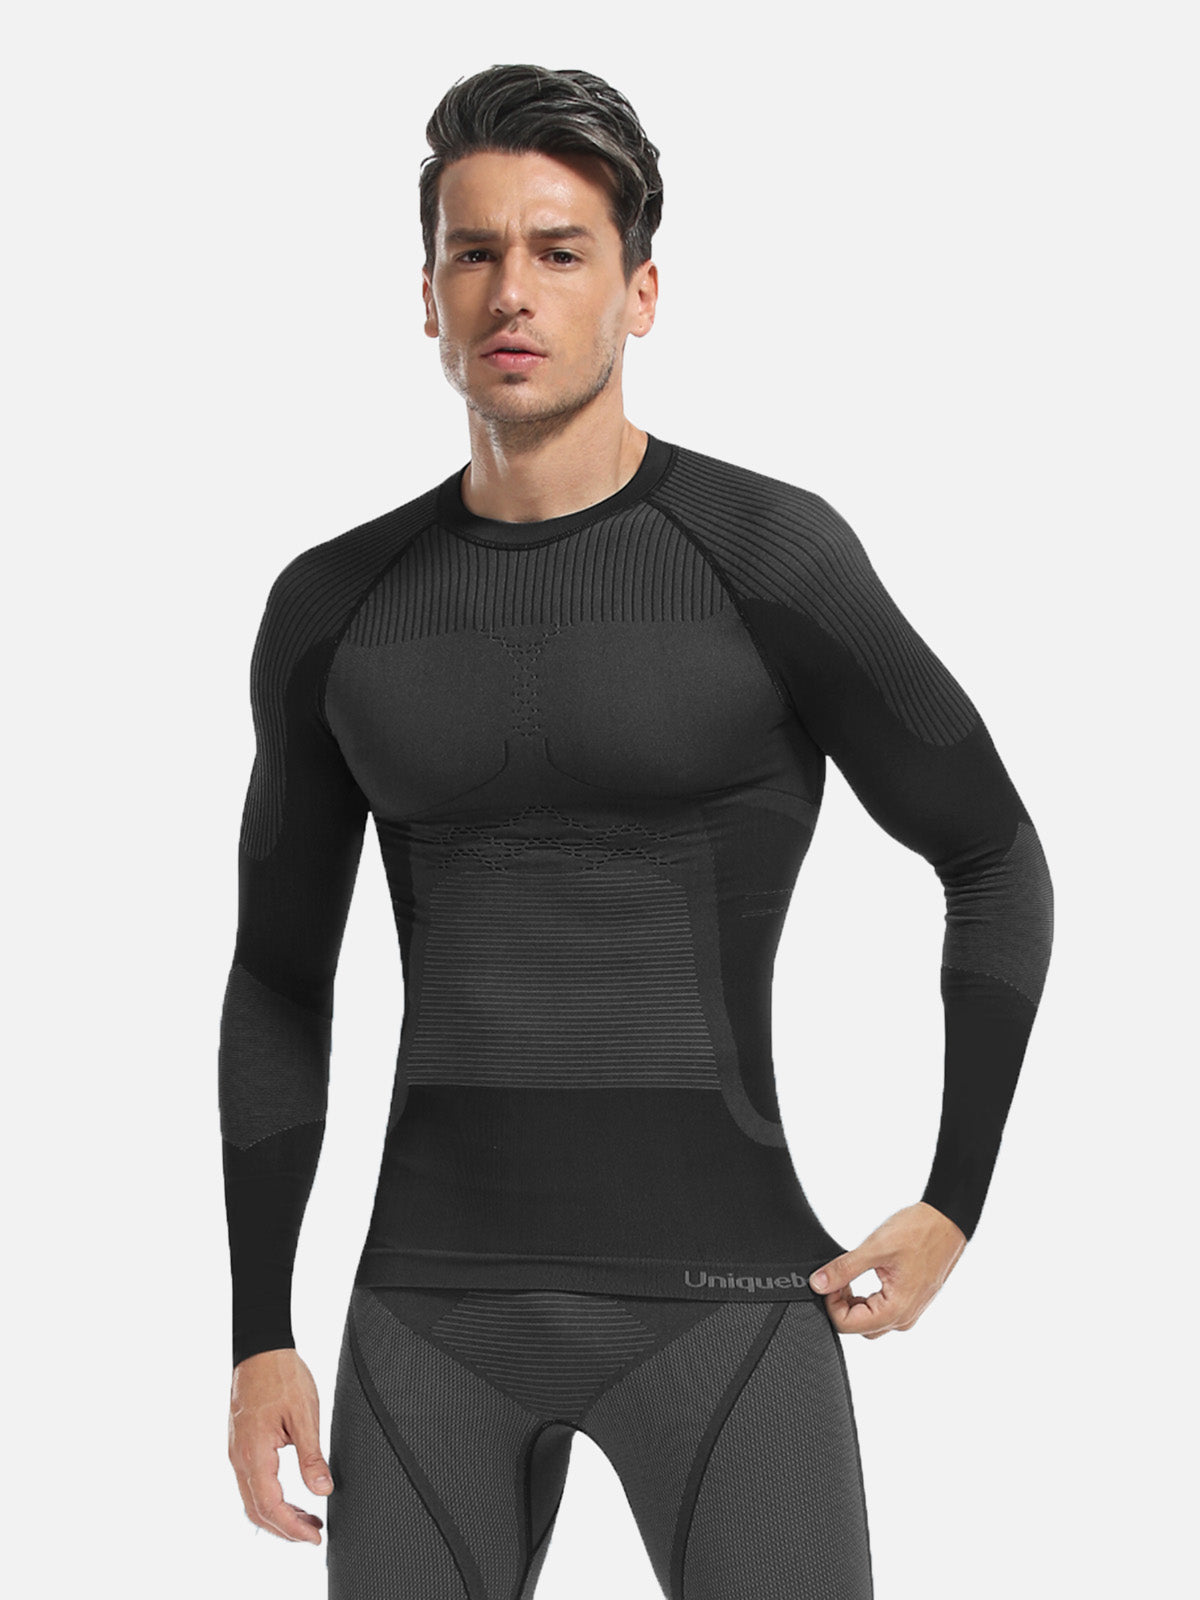 Uniquebela Men's Thermal Underwear Baselayer Set for Winter, Cold Weather, Skiing